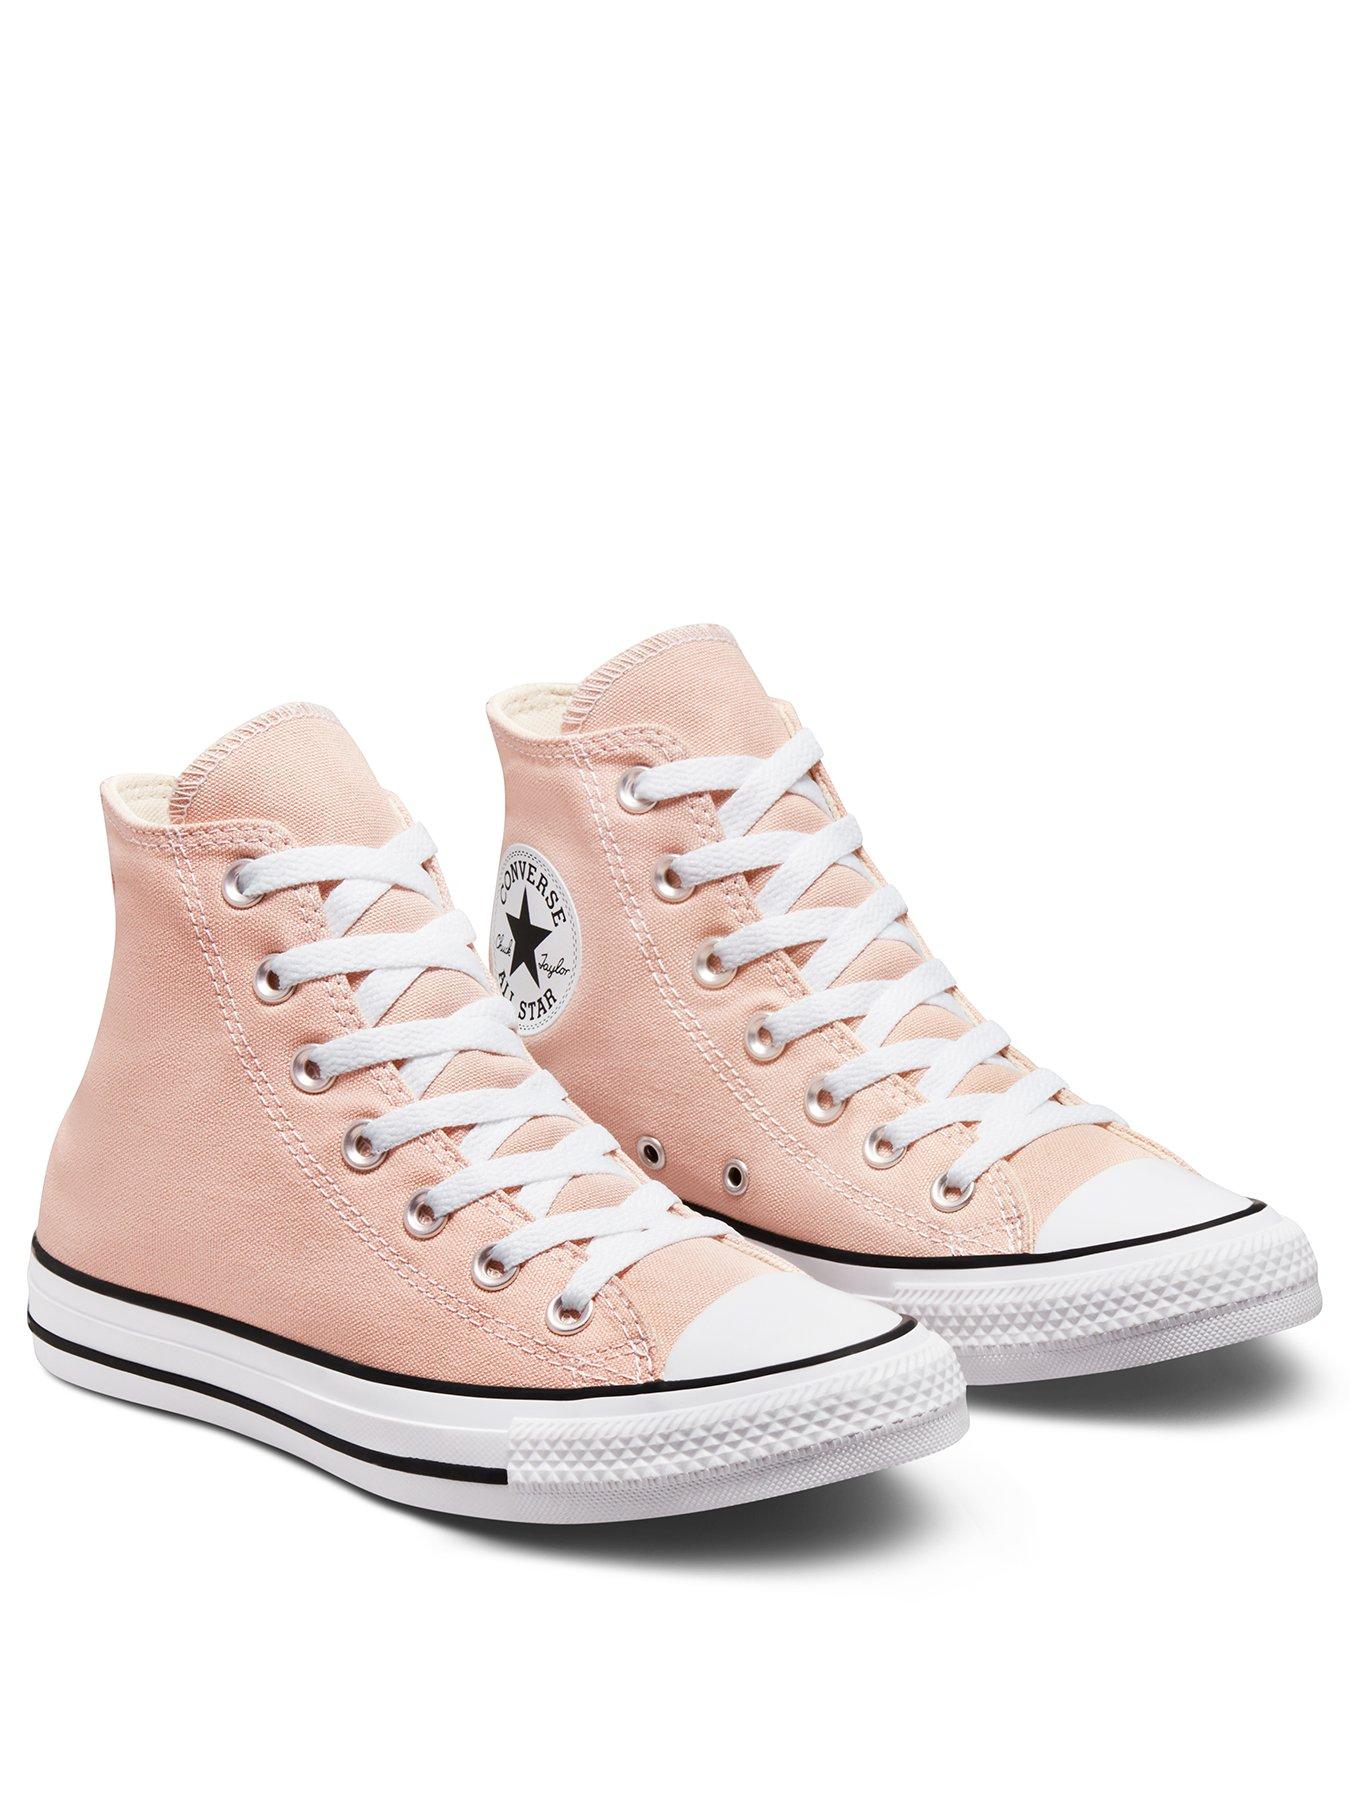 Trainers Chuck Taylor All Star Partially Recycled Cotton Hi Top Trainers - Pink/White